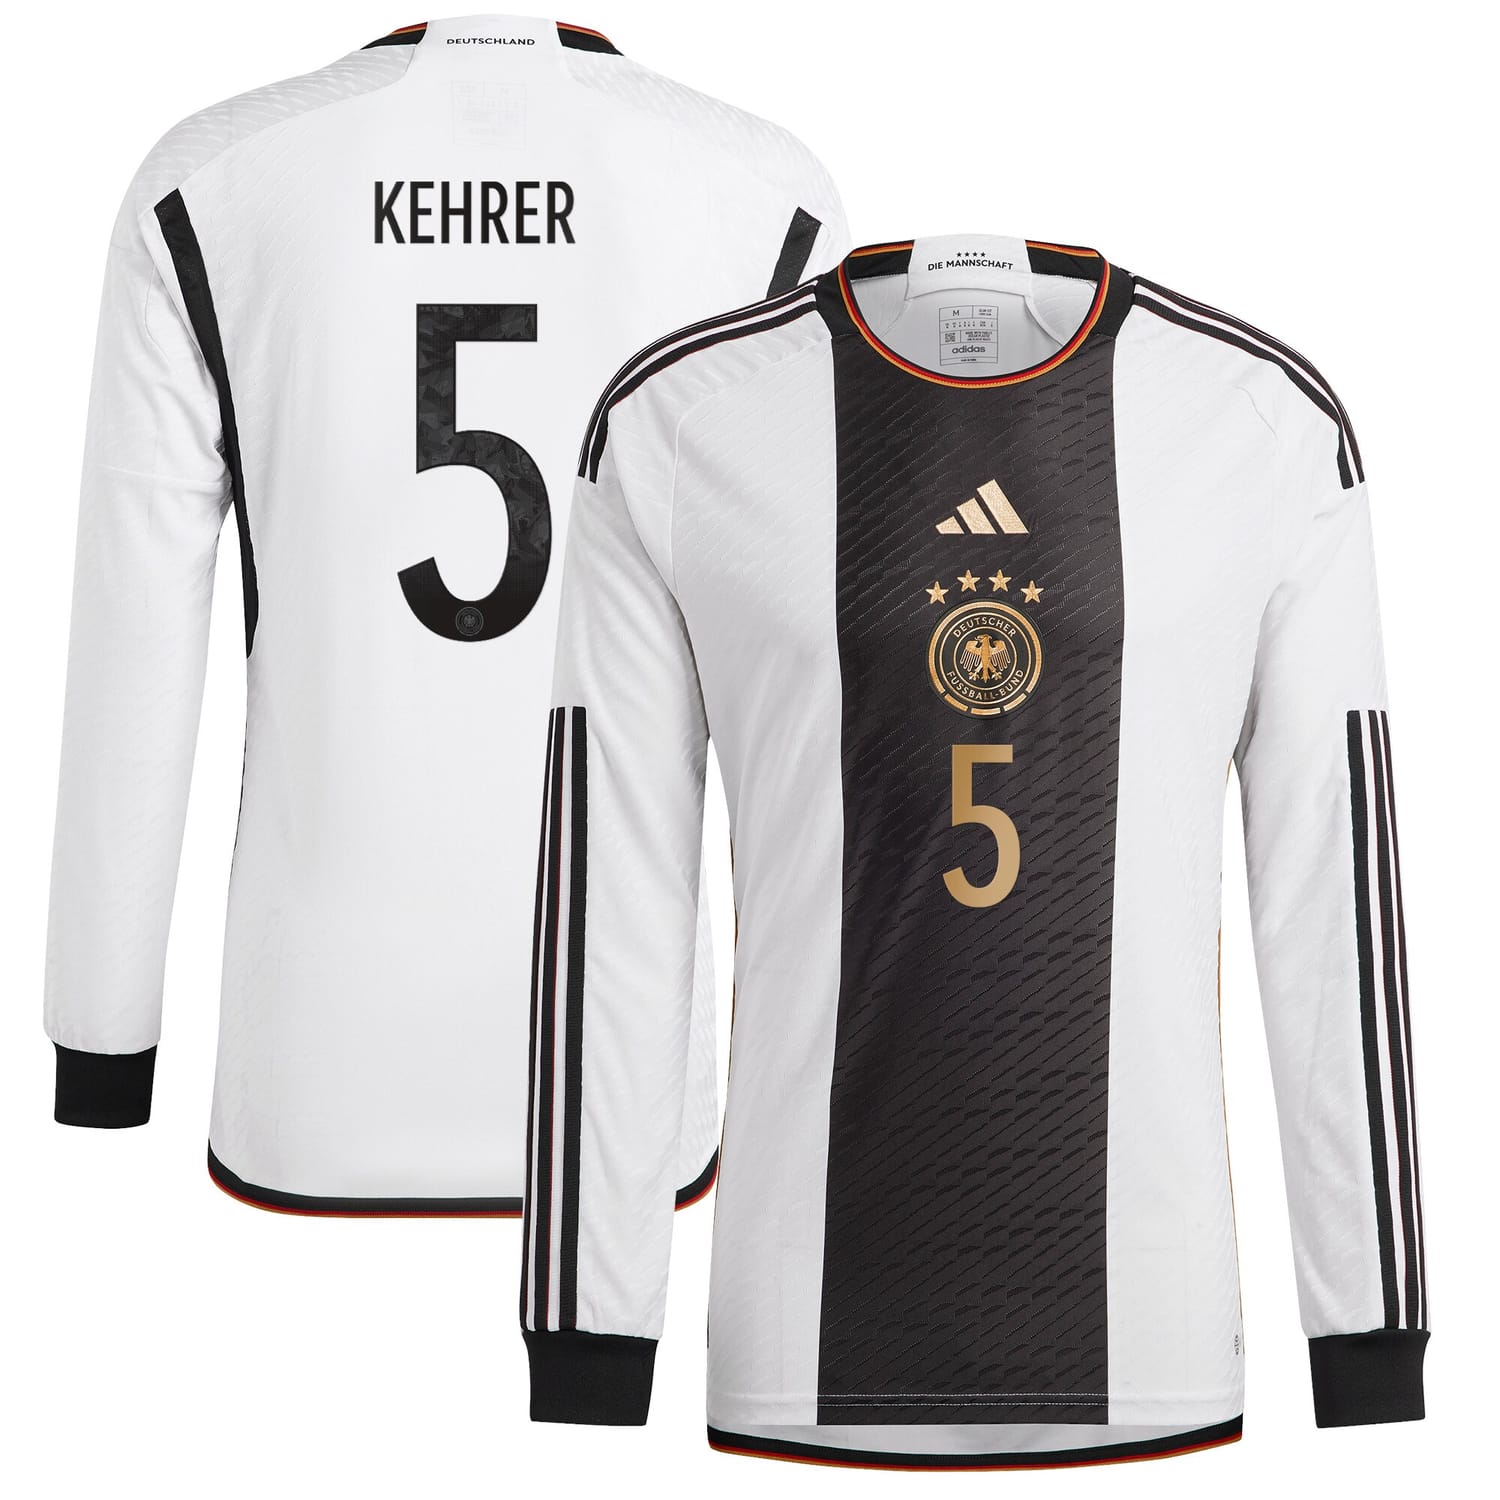 Germany National Team Home Authentic Jersey Shirt Long Sleeve player Kehrer 5 printing for Men